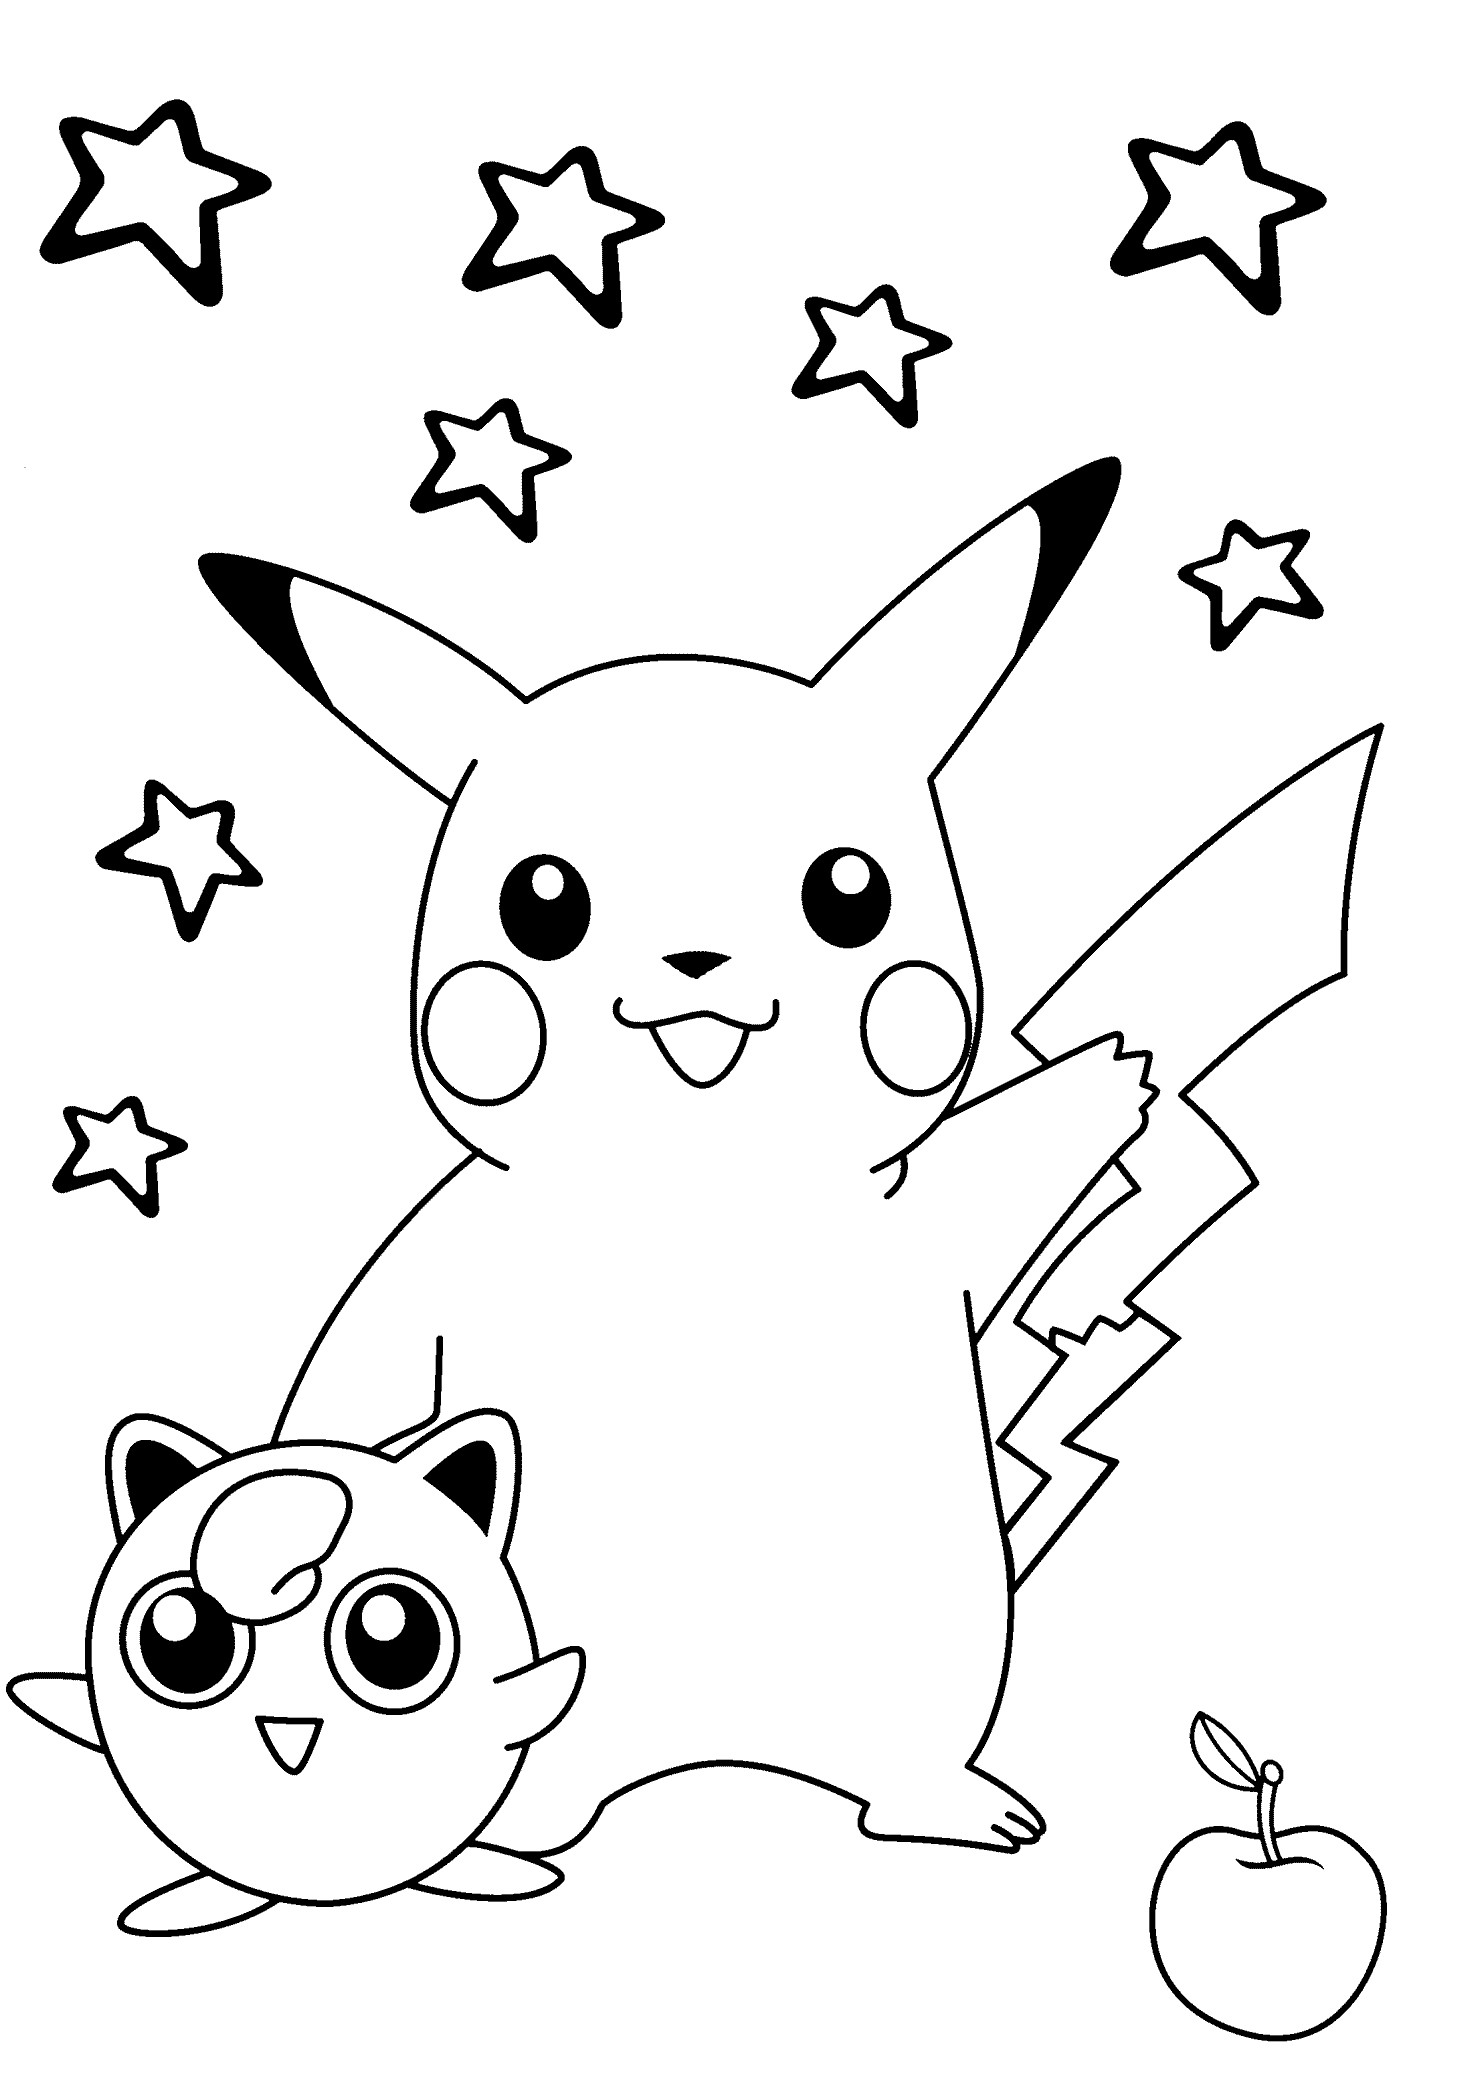 Pokemon Coloring Pages to Print